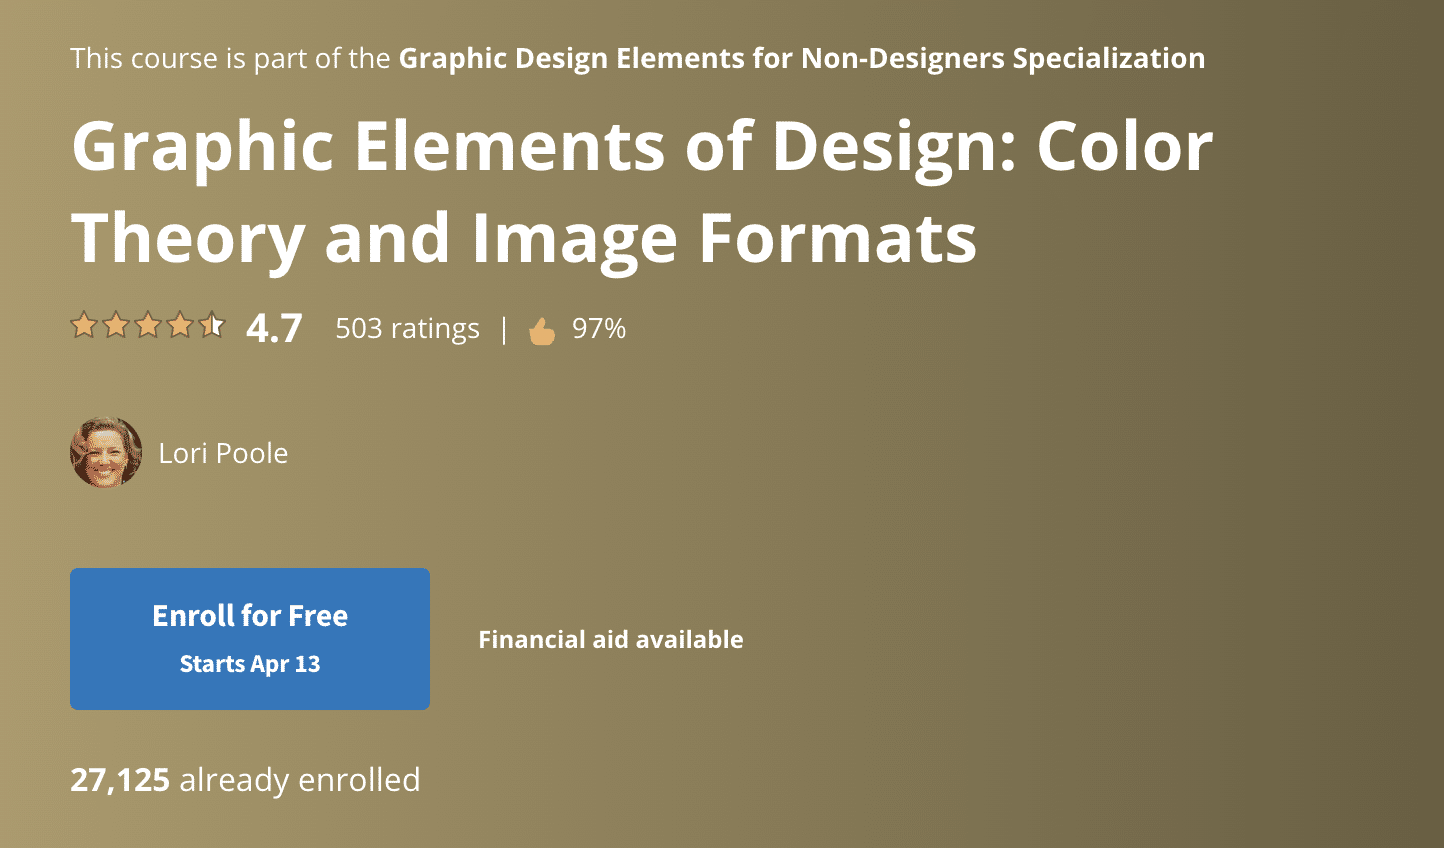 Graphic Elements of Design: Color Theory and Image Formats